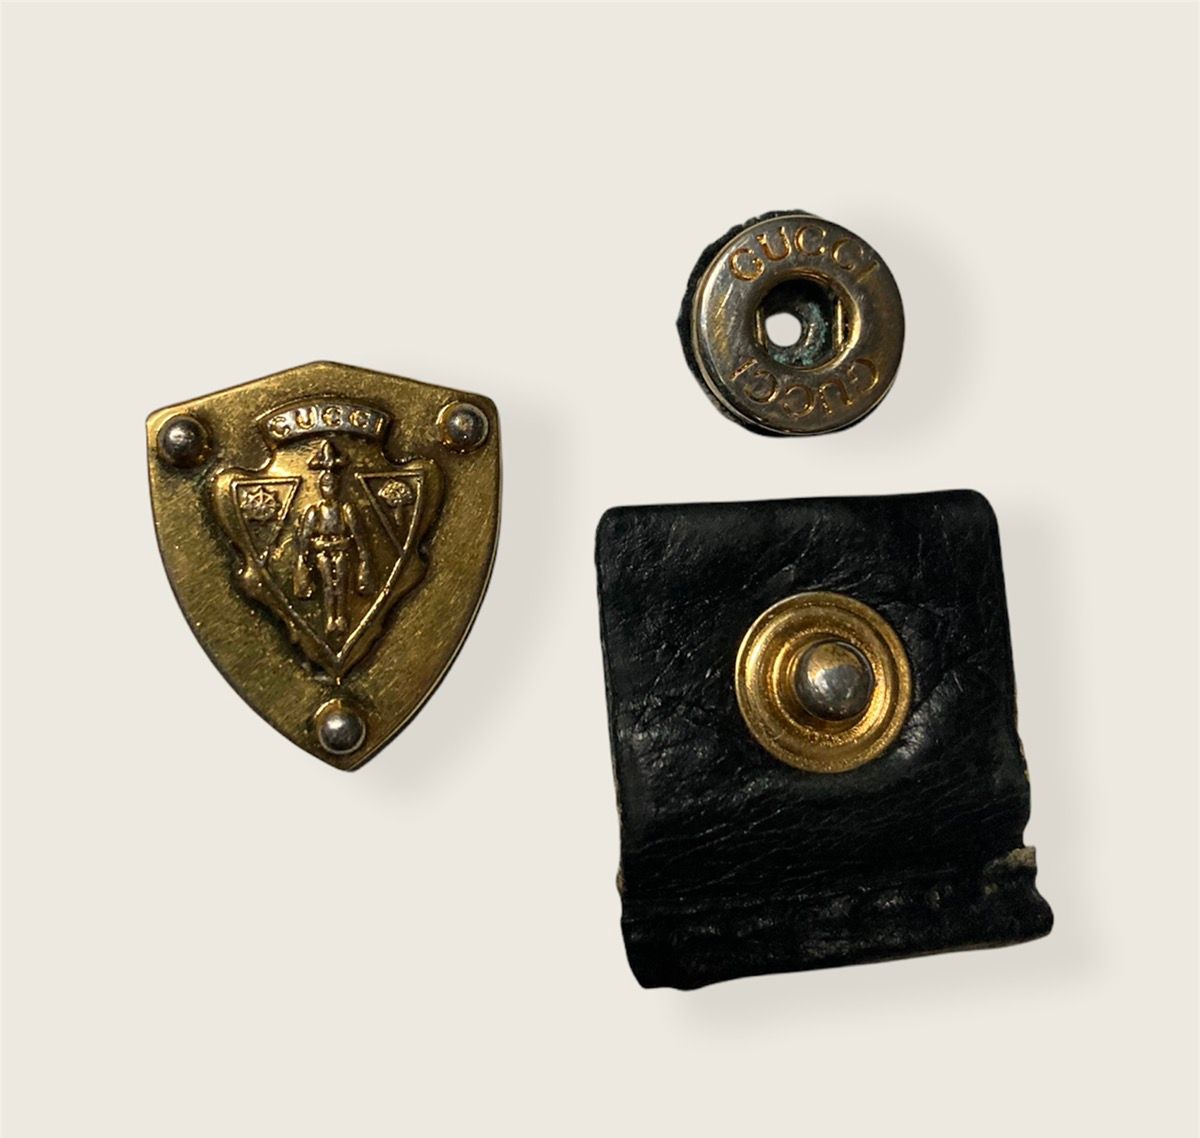 Gucci Crest Pin Emblem and Button Accessories - 2